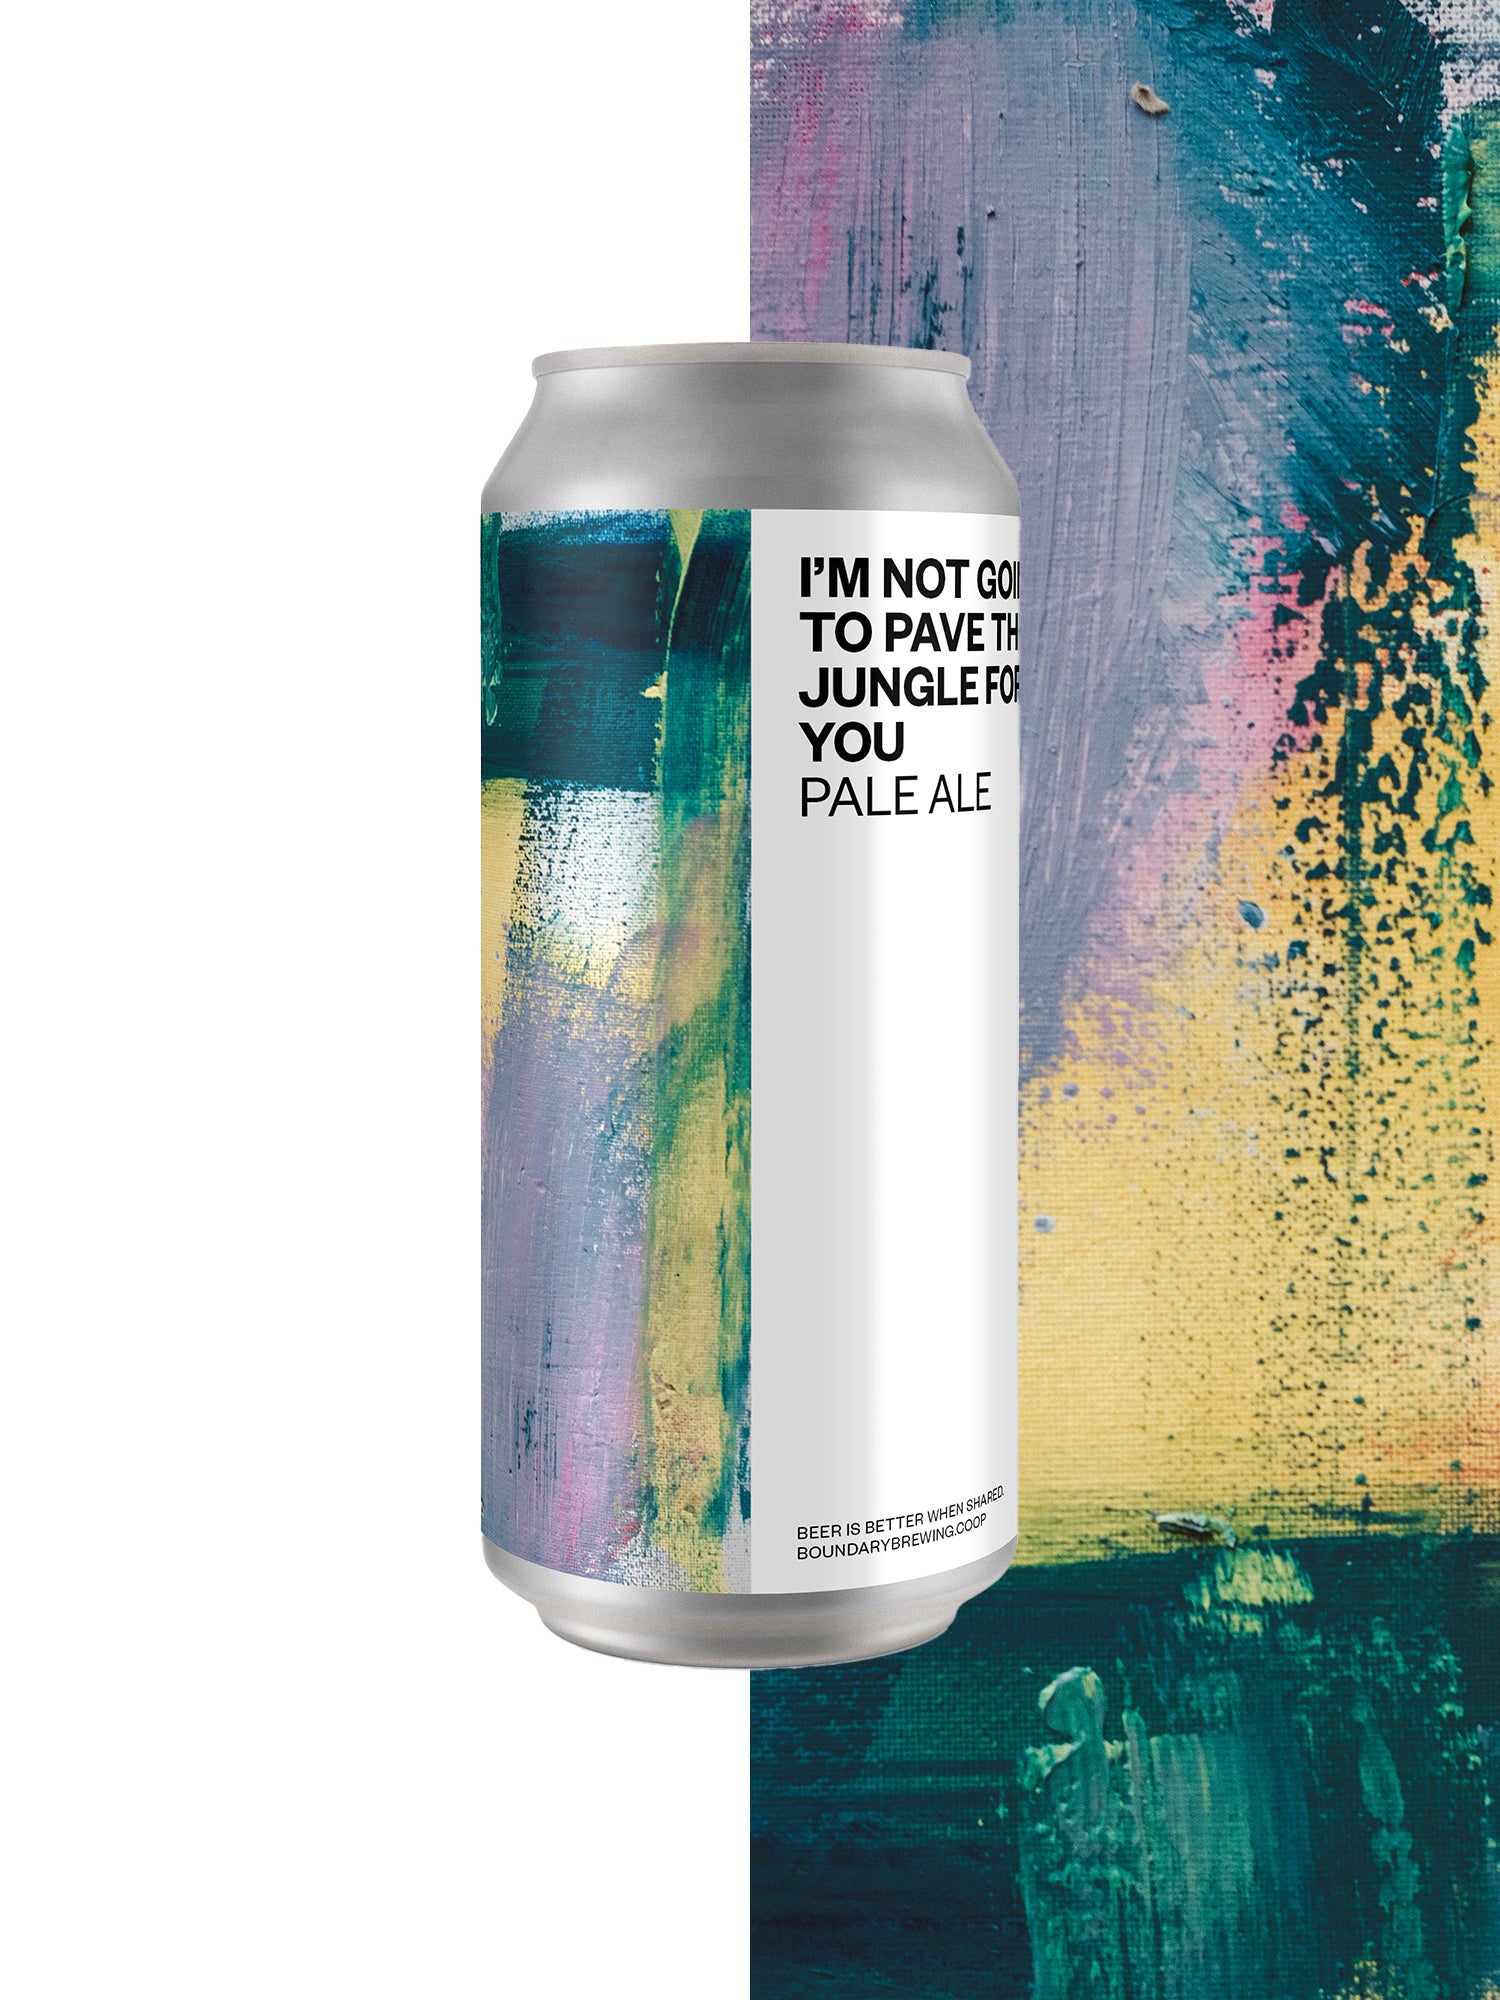 I'M NOT GOING TO PAVE THE JUNGLE FOR YOU Pale Ale (4-pack) 3.4%